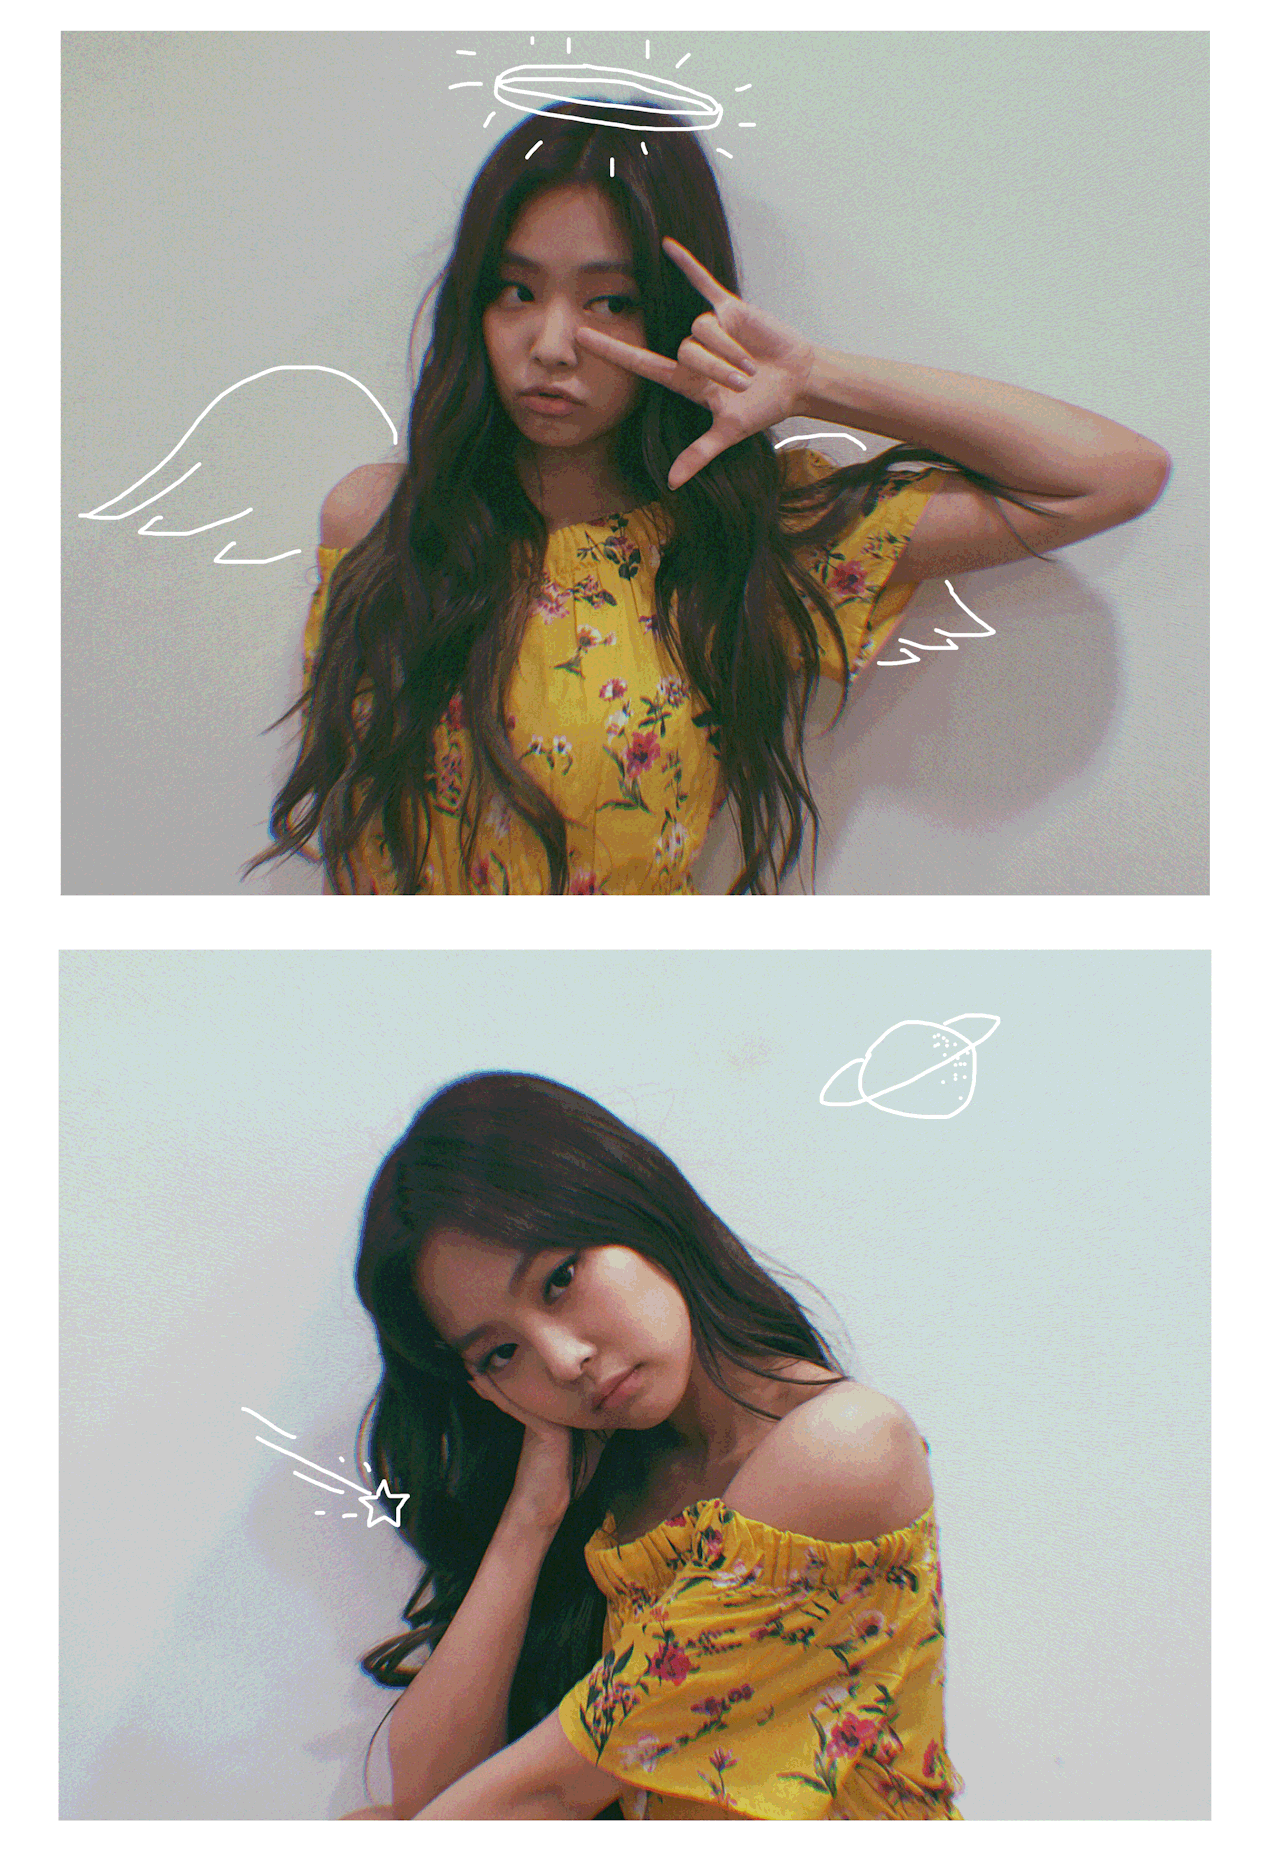 All Day All Night - Jennie IG update Gif[[MORE]] I know I’m a bit late...